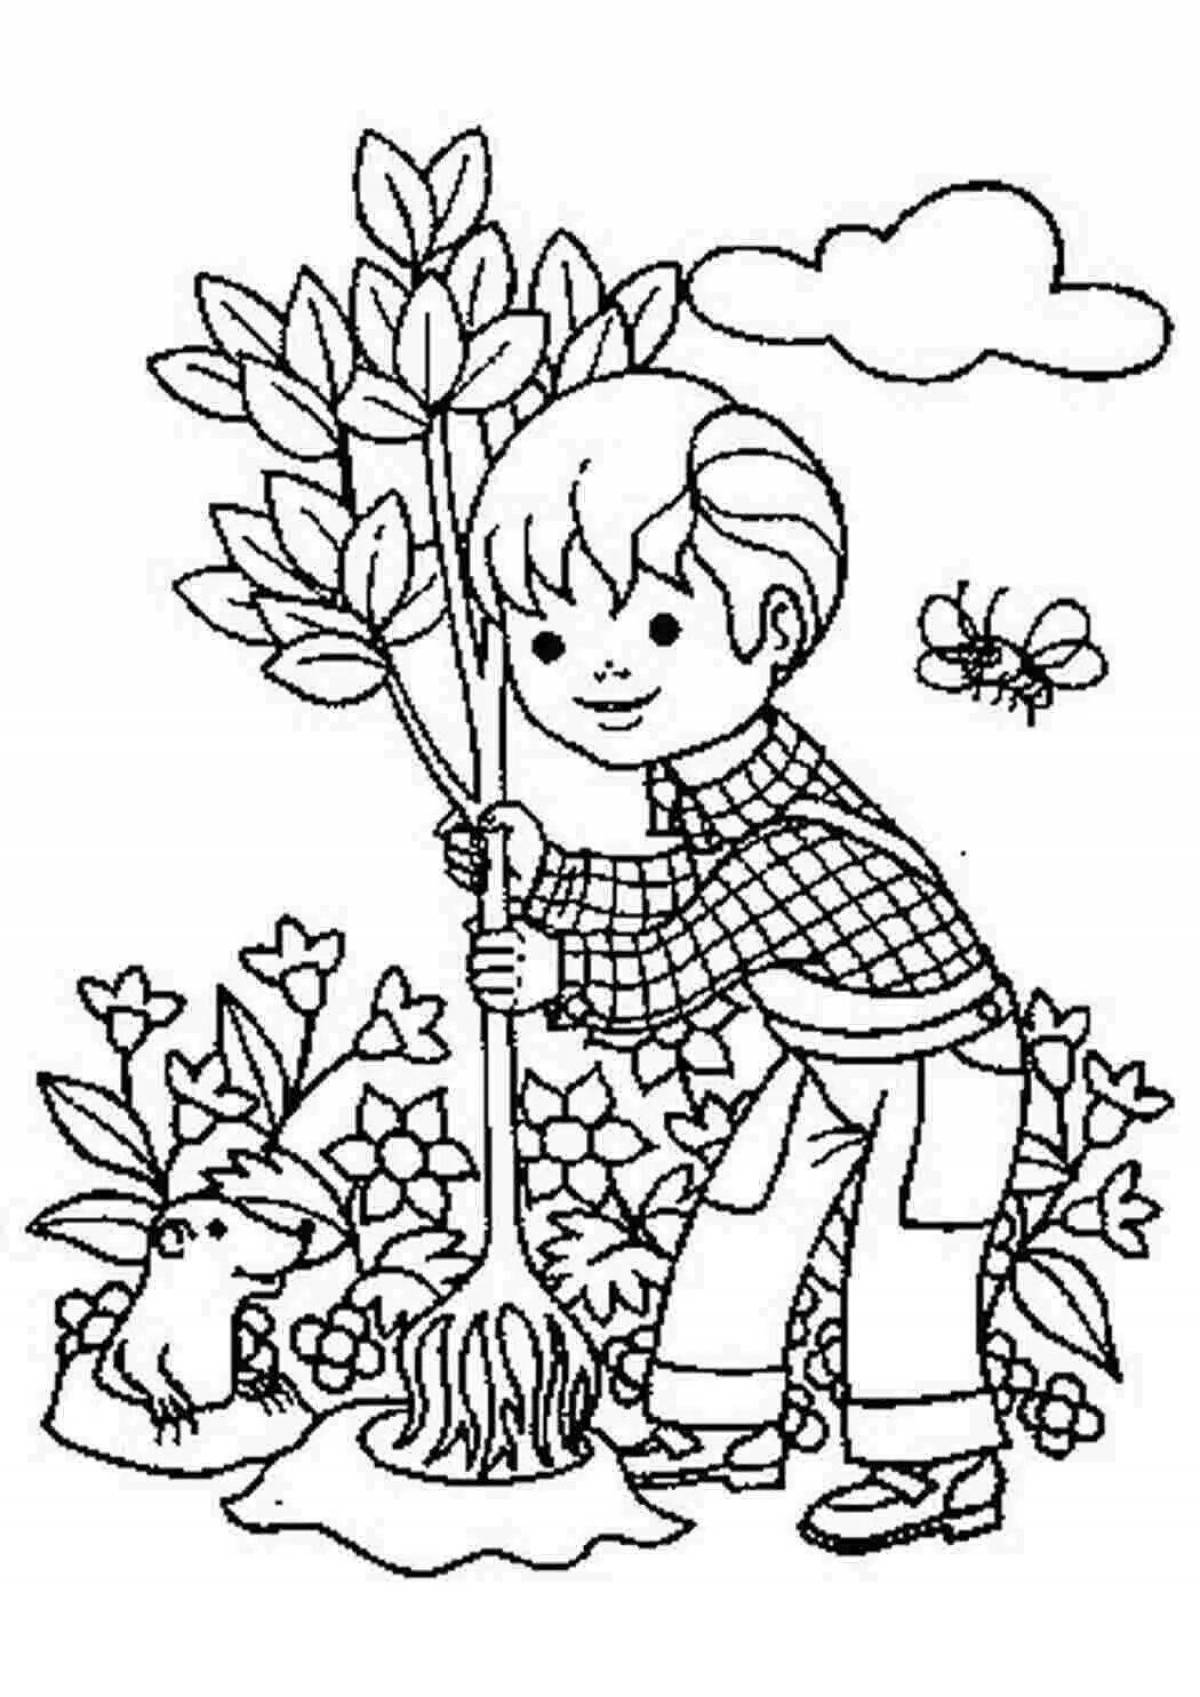 Fairy ecology coloring book for elementary grades